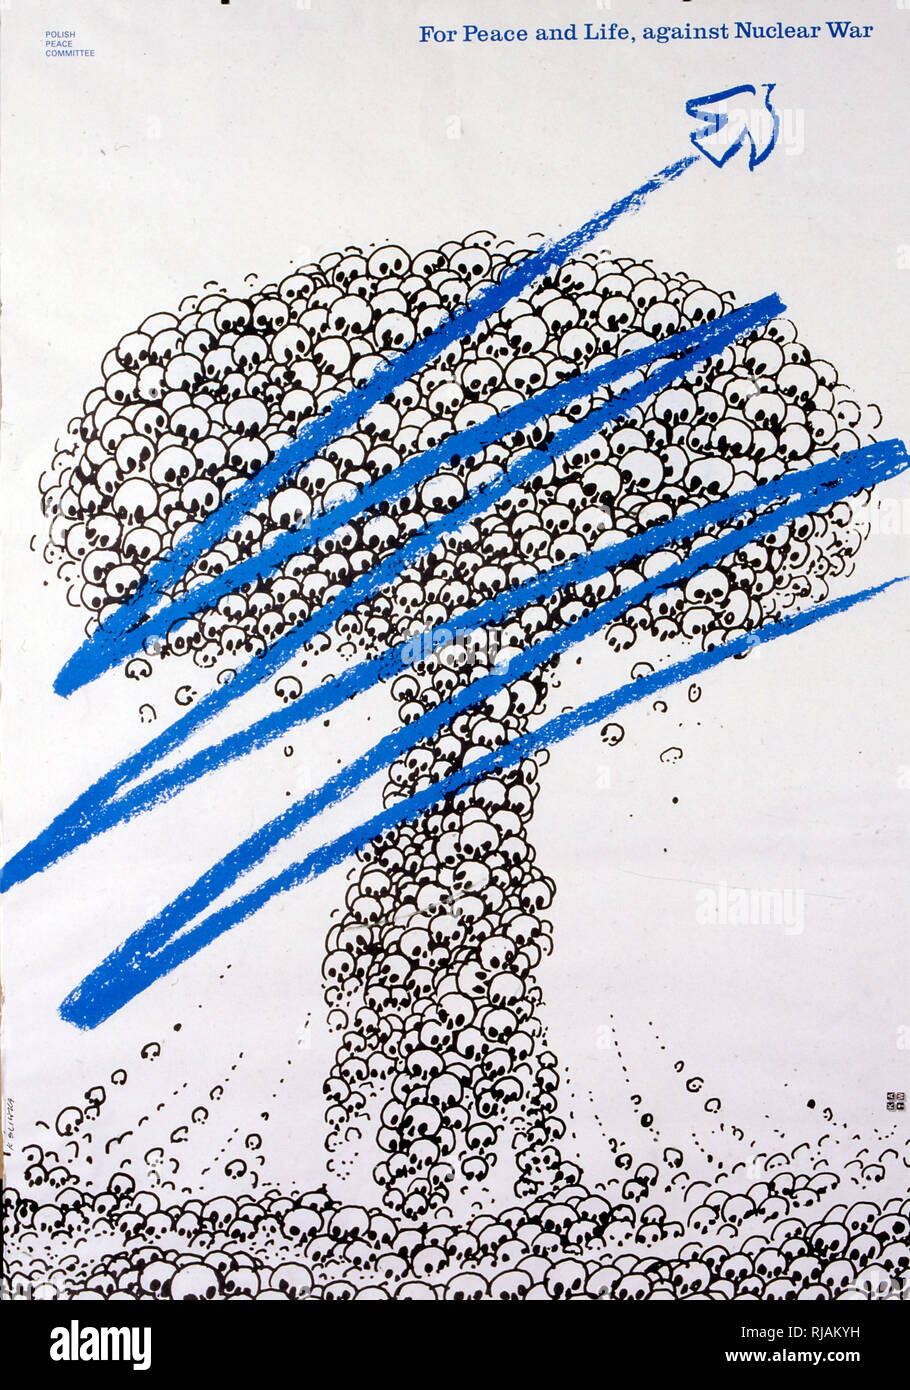 for peace and life against nuclear war' 1983, anti-nuclear war, poster published by the polish peace committee Stock Photo